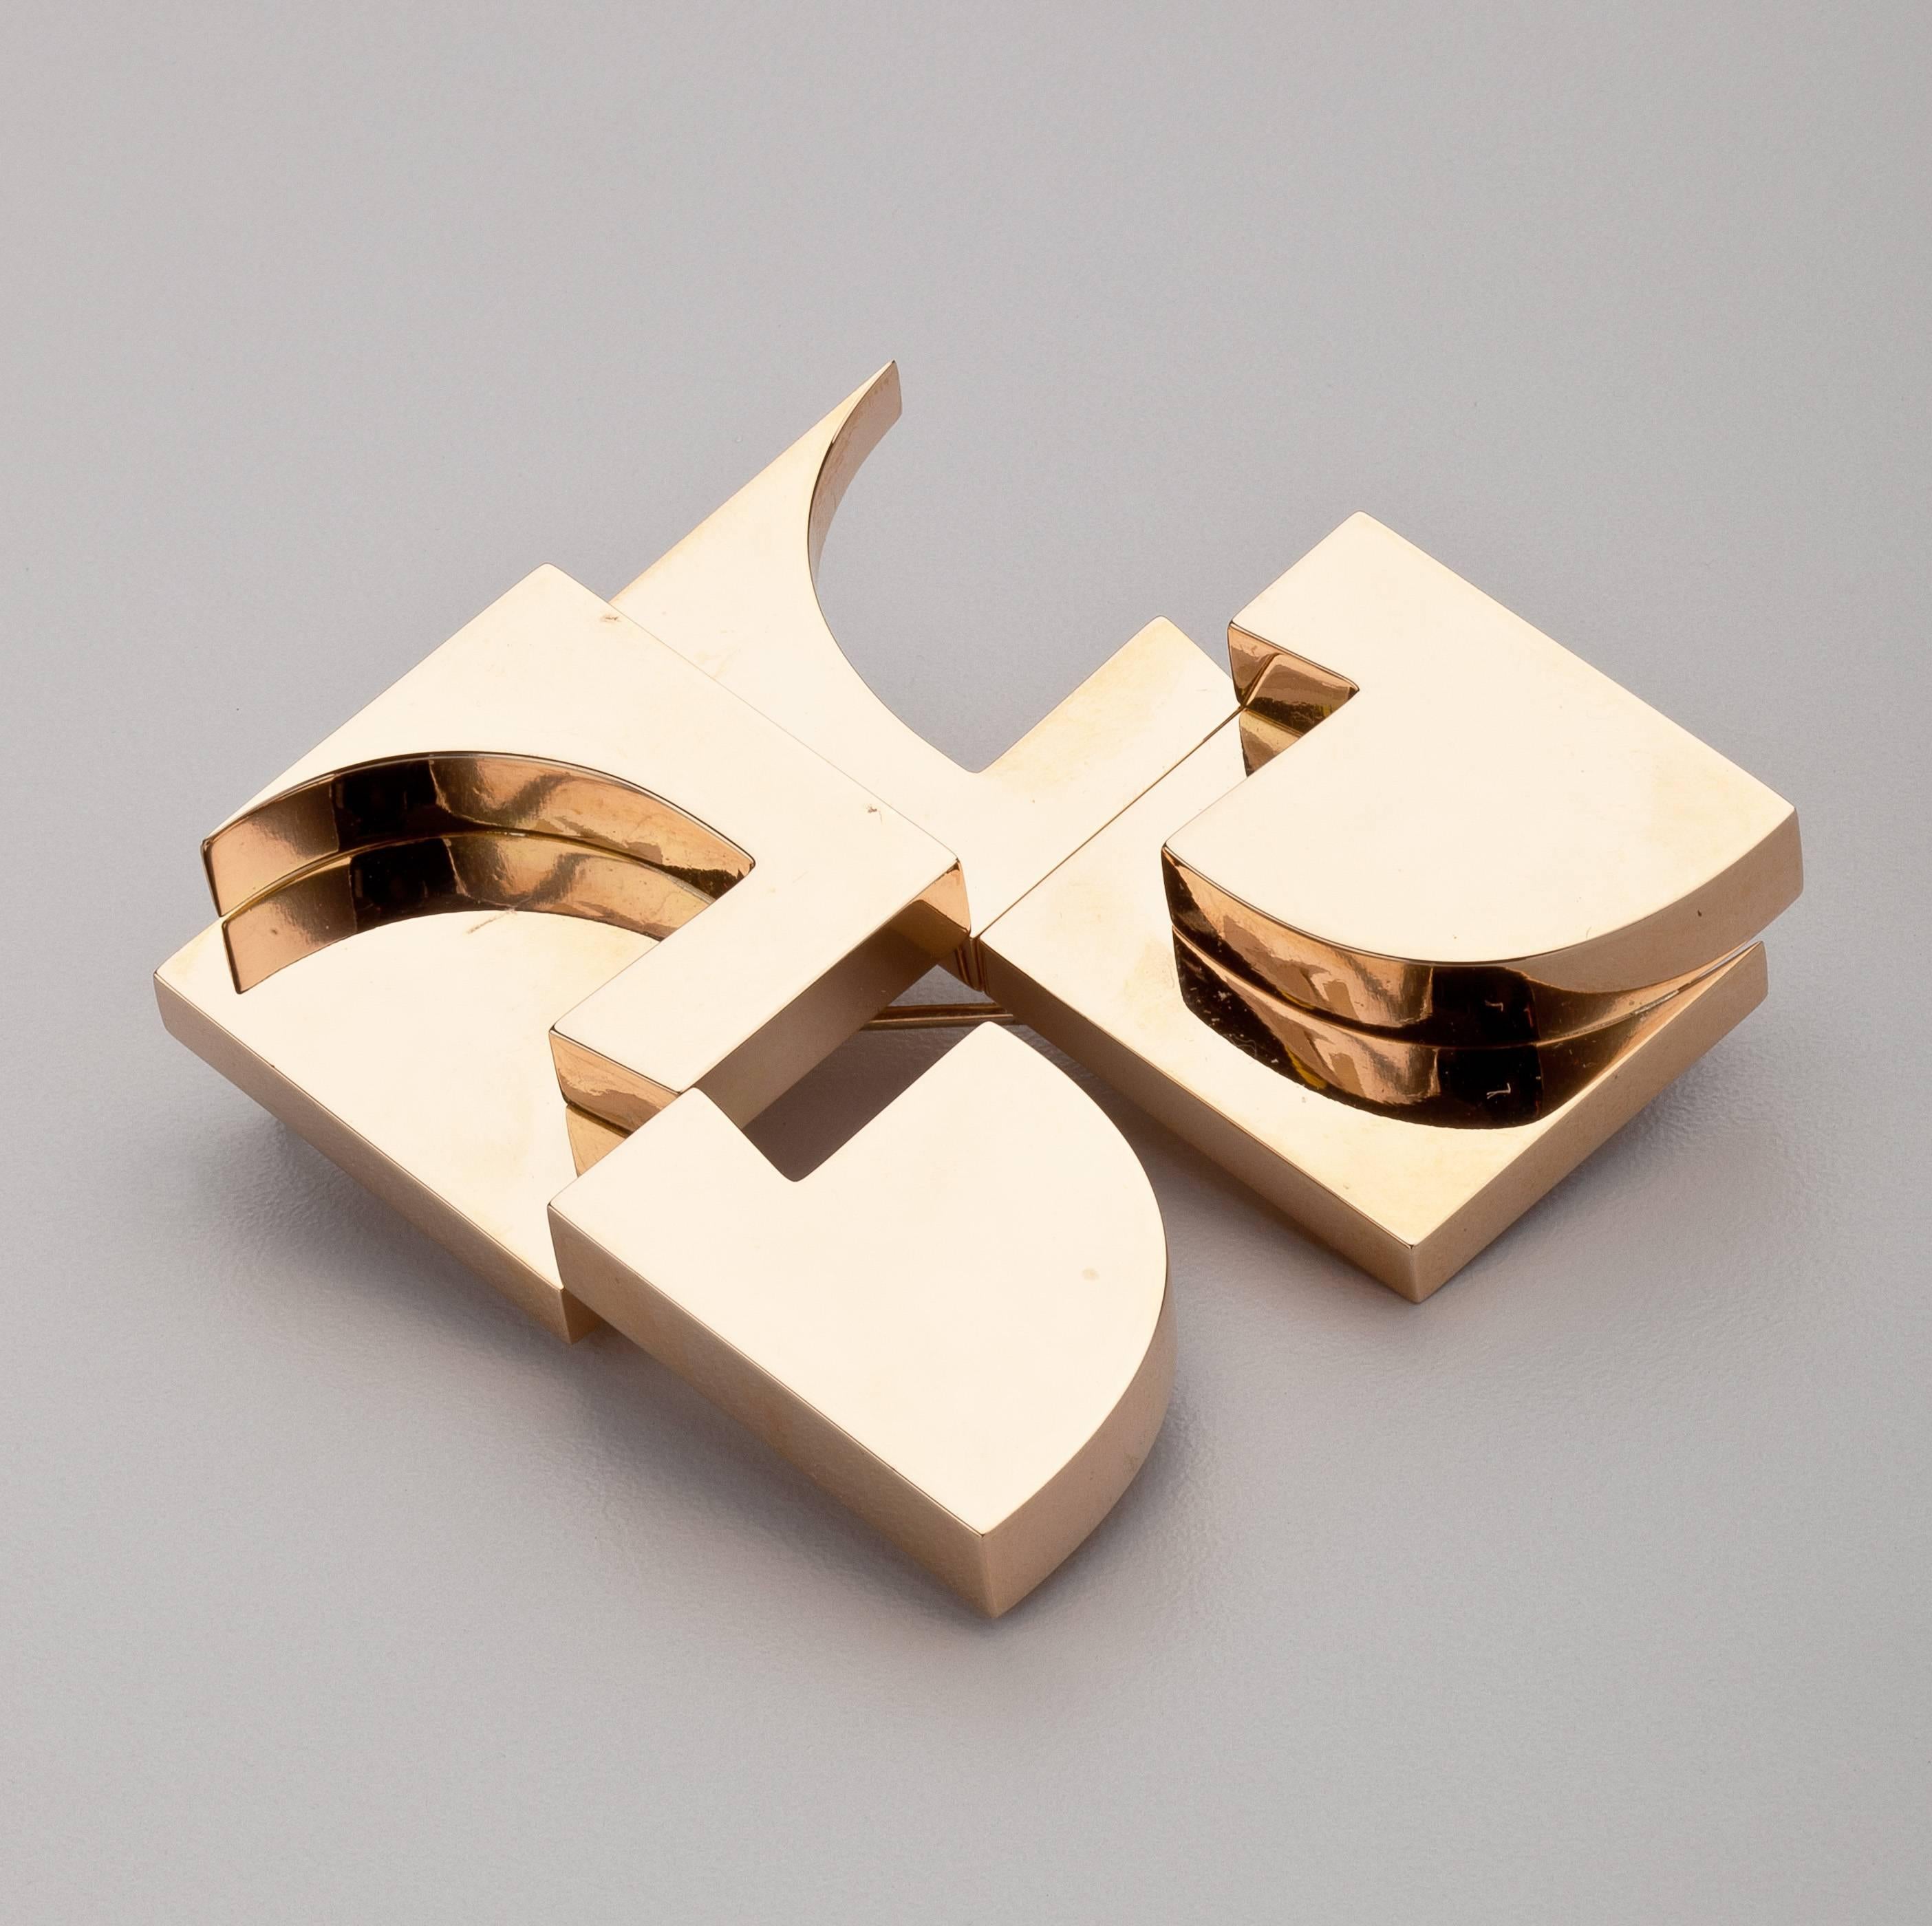 An abstract gold pendant/brooch by avant-garde artist Hans Richter (1888-1976).  This 18 karat gold pendant with a pin and suspension hook was designed by Richter in 1971 for GEM Montebello in Milan, Italy.  Its layered abstract geometric designs